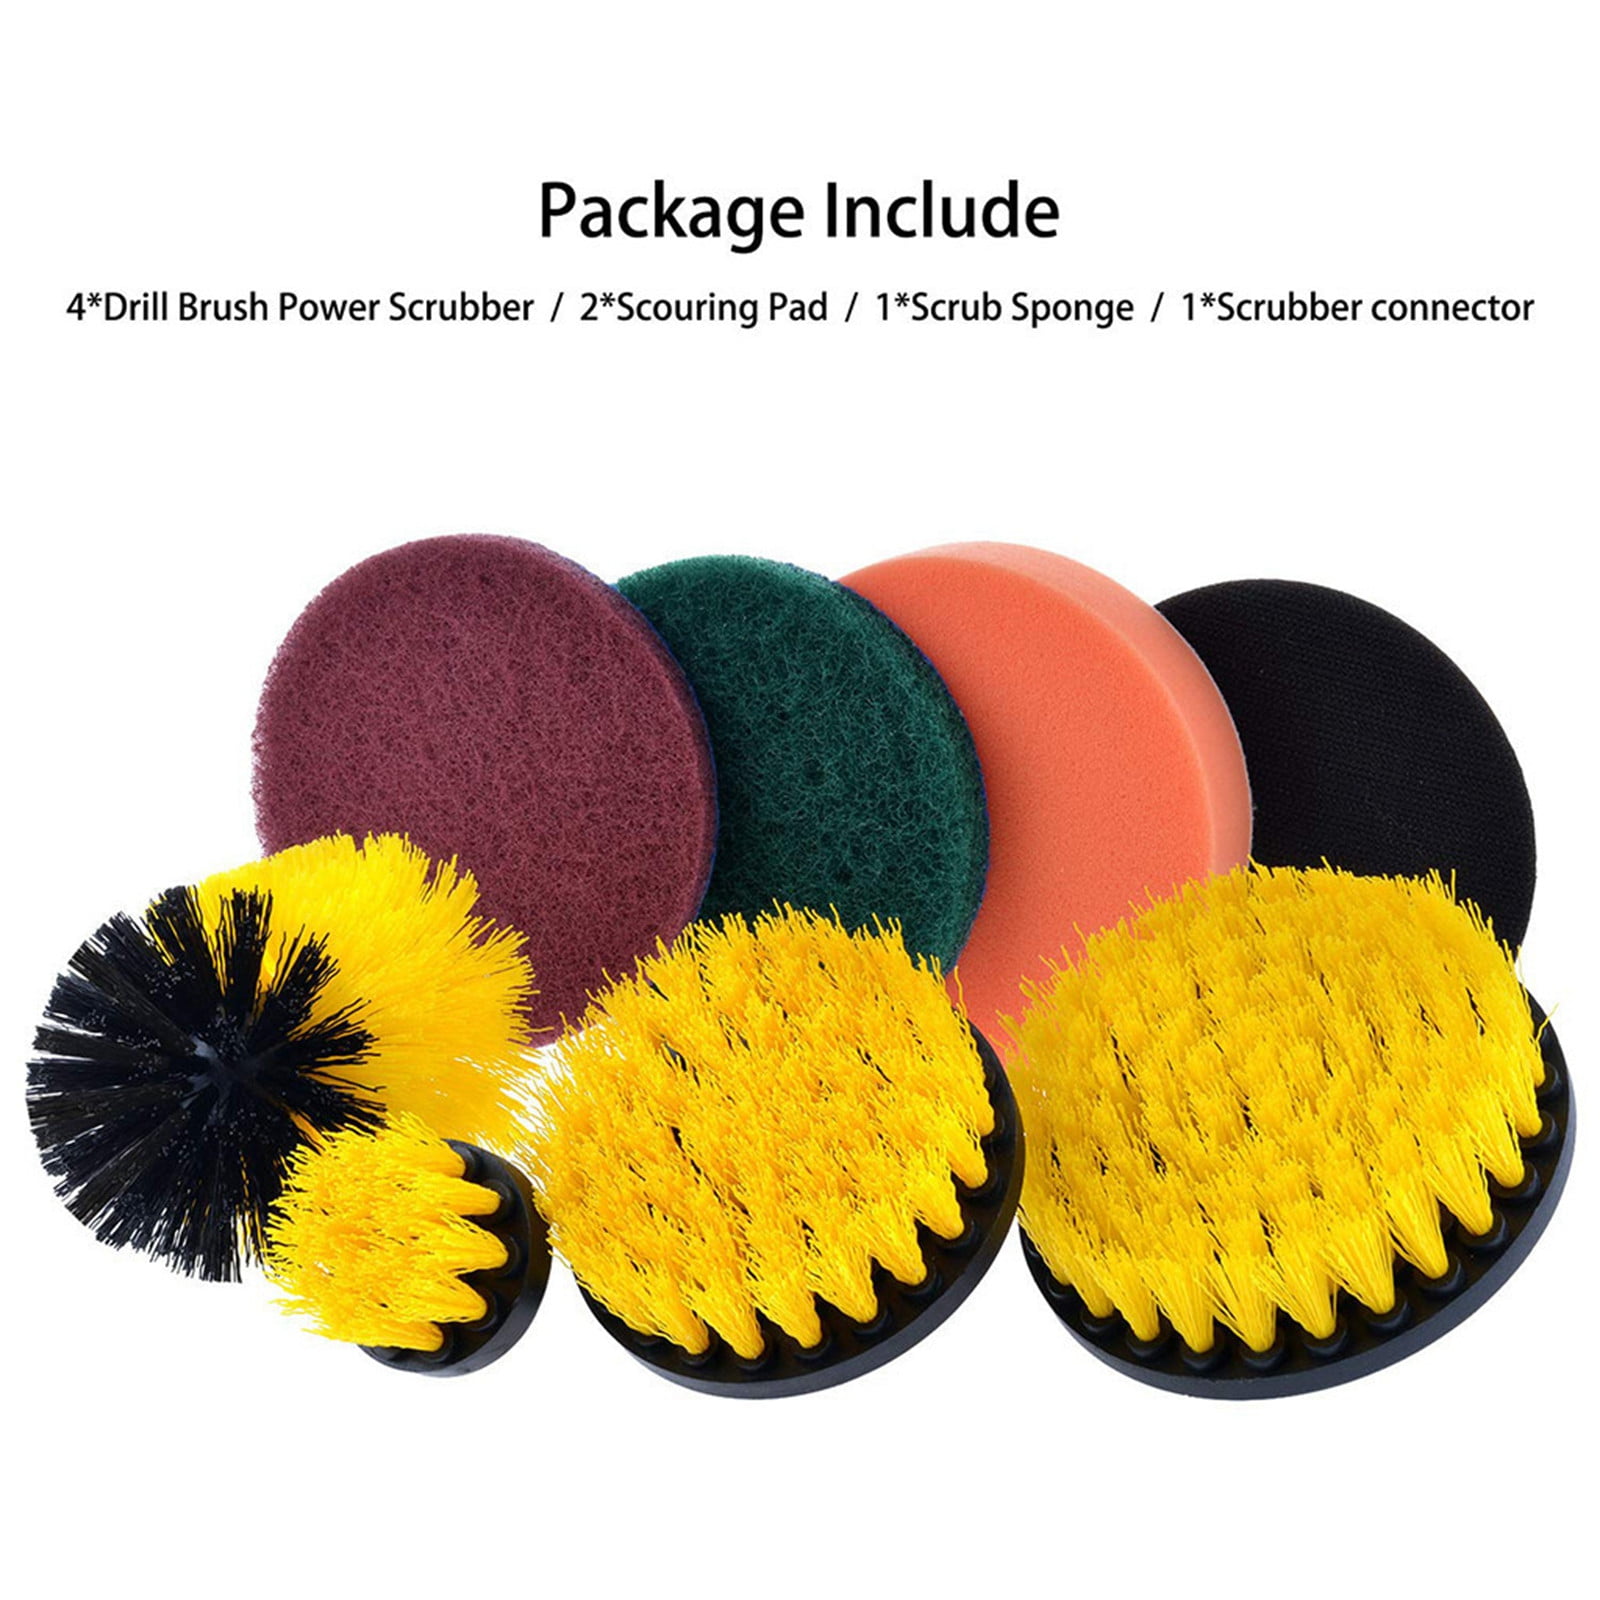 9 Piece Power Scrubber Kit All Purpose Cleaning Scrubbing For Cordless Drill US 